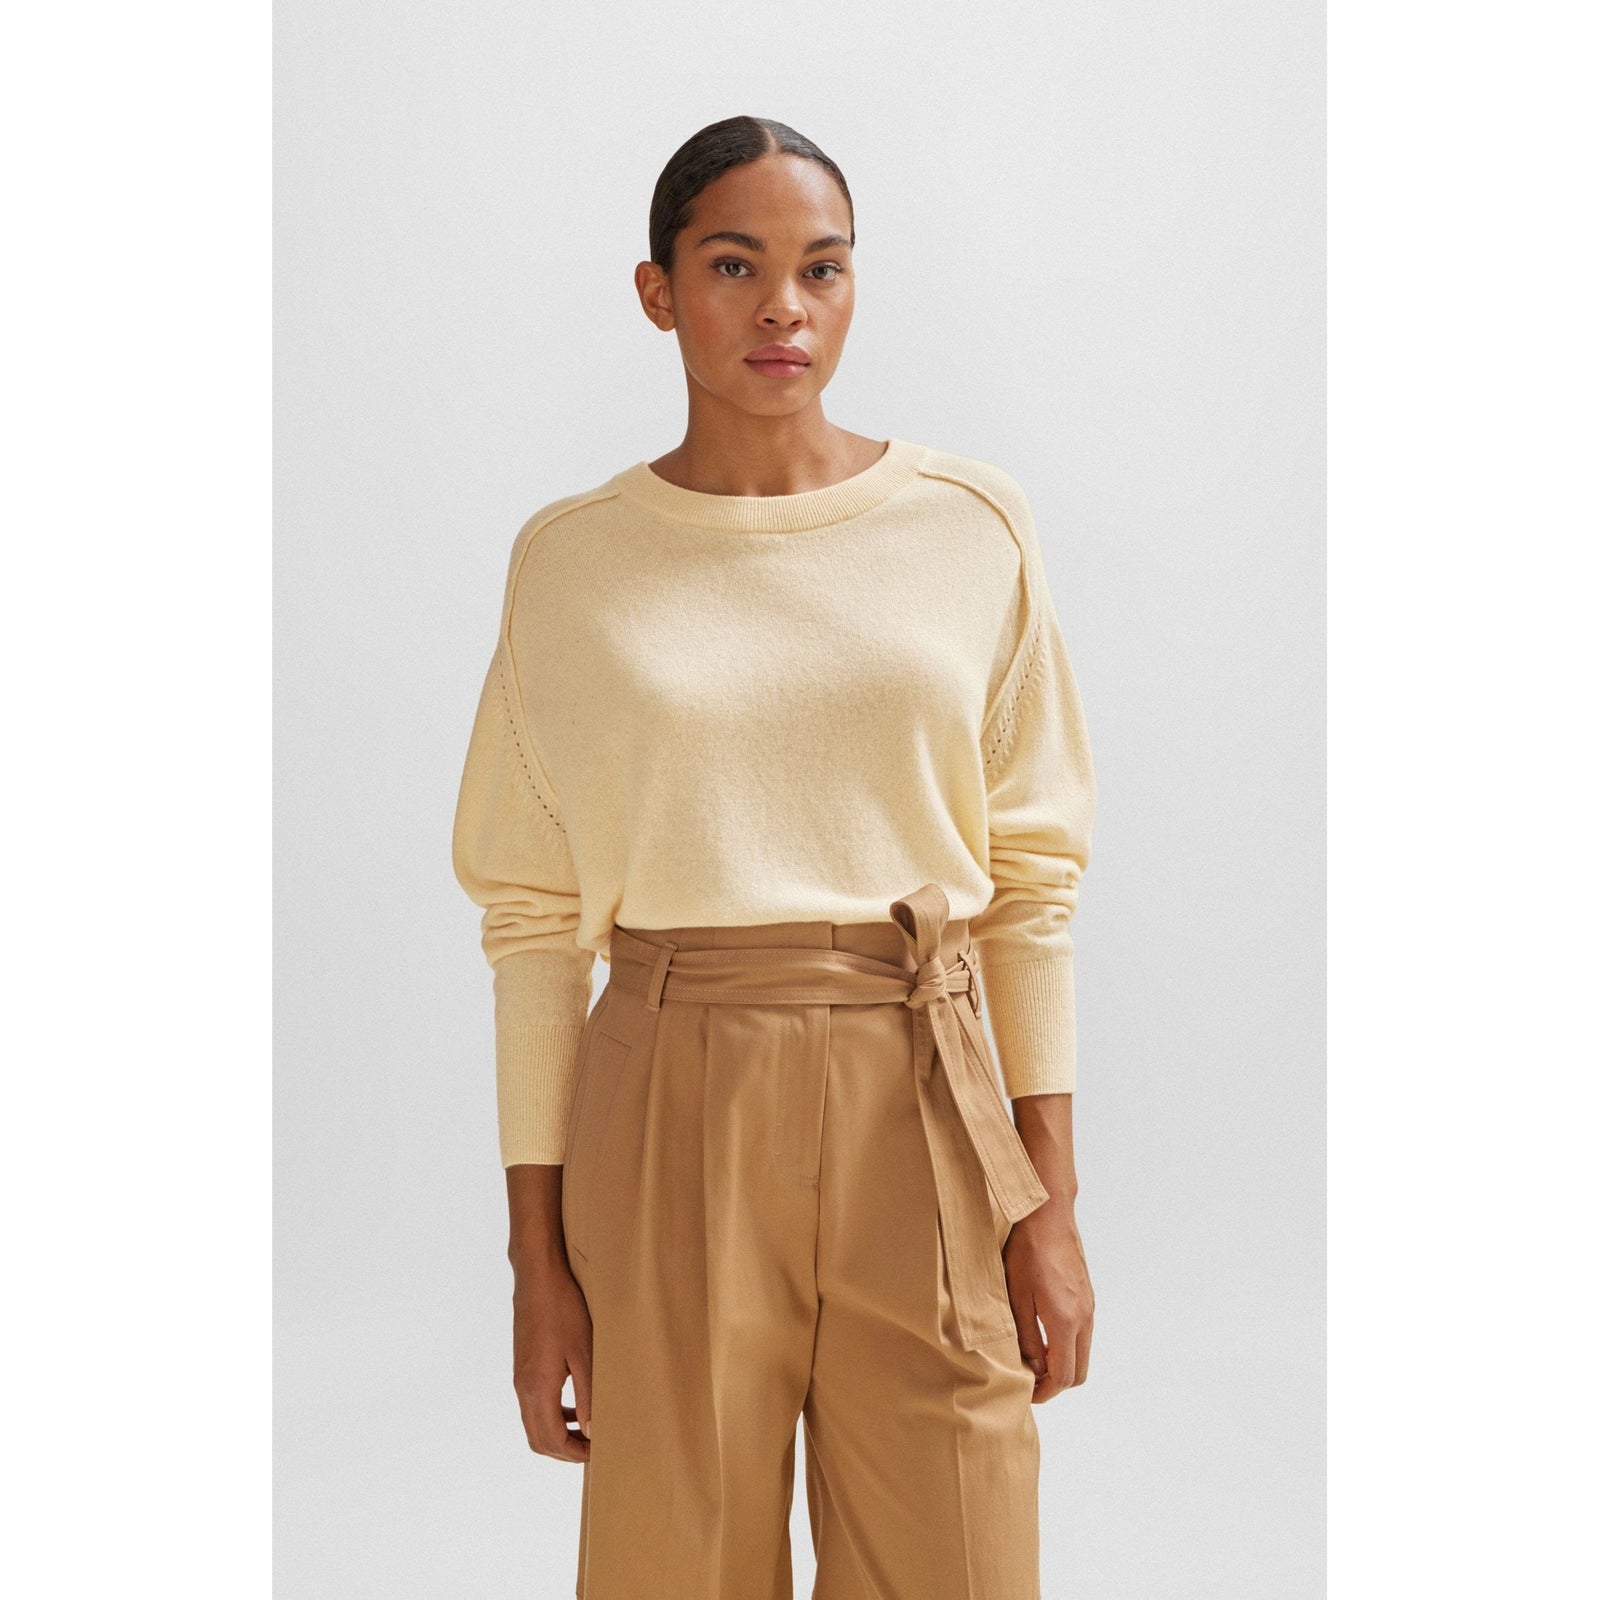 BOSSMELANGE SWEATER IN CASHMERE WITH SEAM DETAILS - Yooto